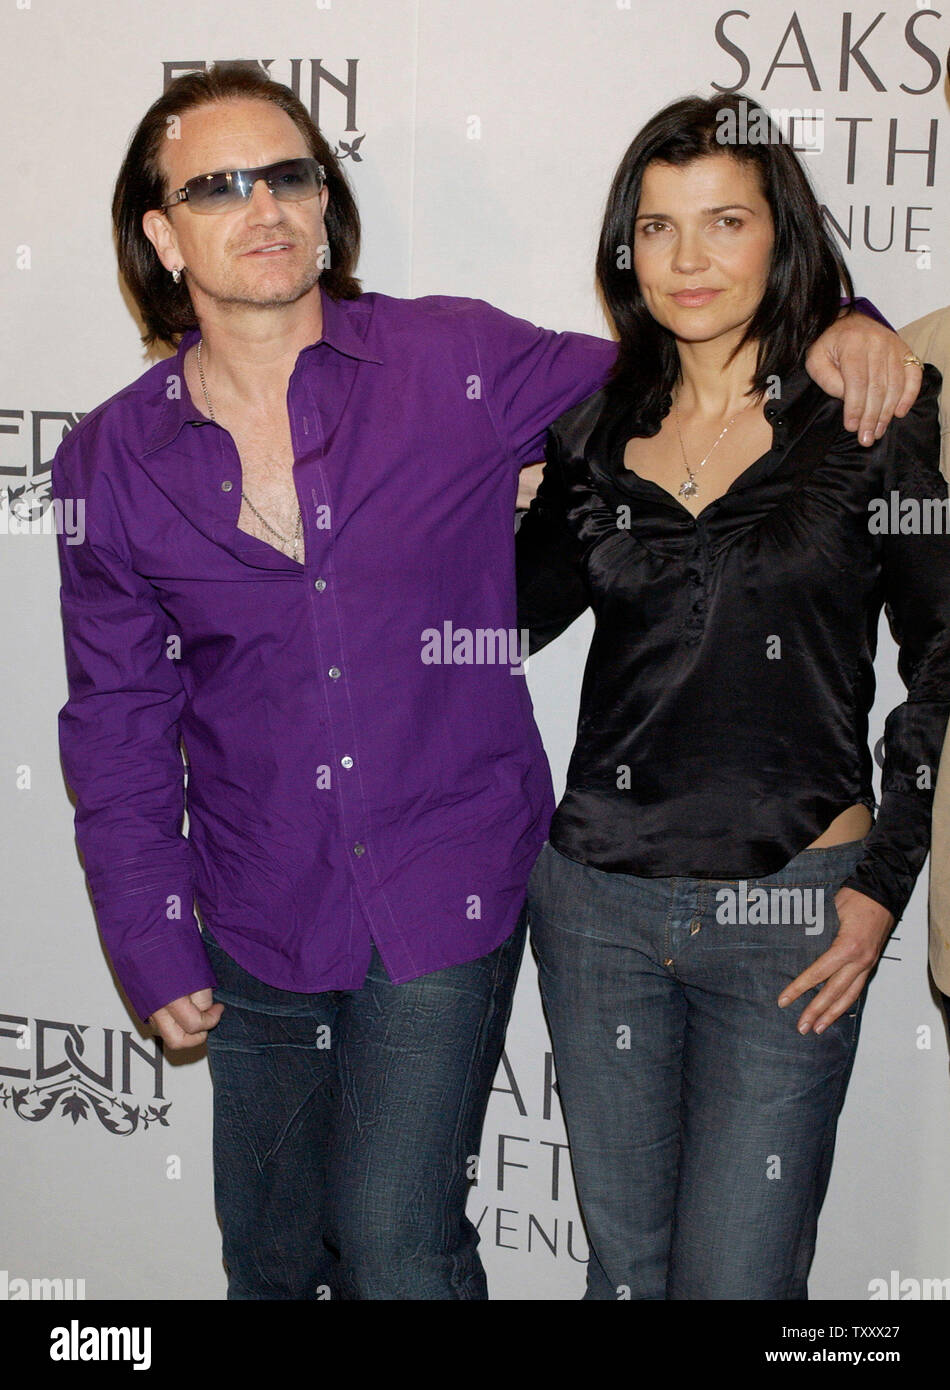 Bono (L), the lead singer for the rock band U2 and his wife Ali Hewson pose upon arriving for launch of new 'Conscious Commerce' clothing line EDUN in Beverly Hills, California March 25, 2005. EDUN is slated for a nationwide launch at 46 Saks Fifth Avenue stores across the U.S., making its debut in Beverly Hills.   (UPI Photo/Lazlo Fitz) Stock Photo